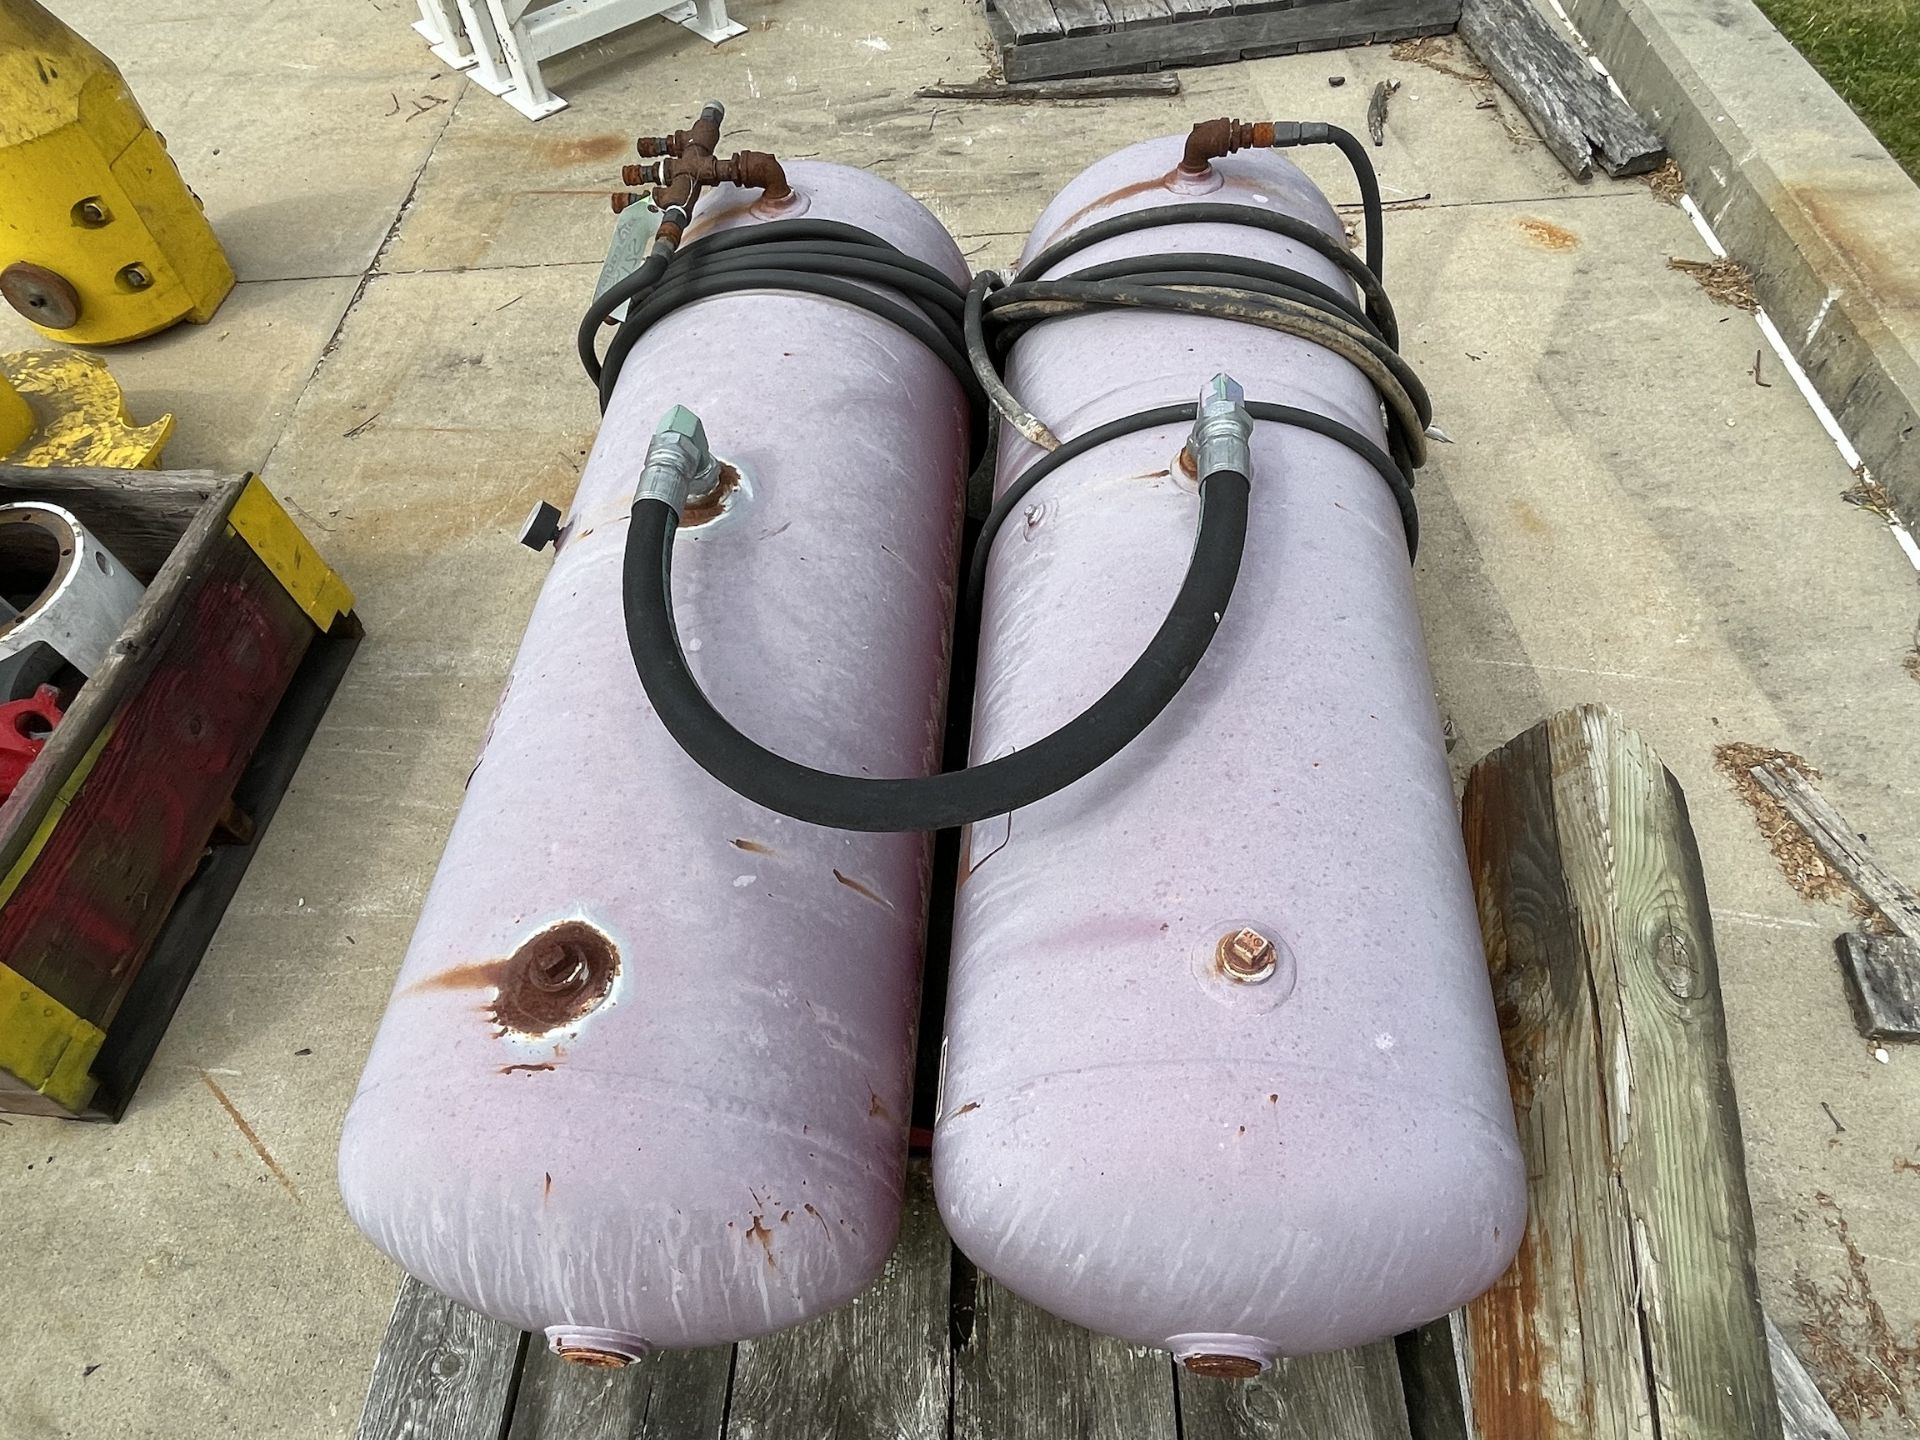 Lot of 2 Air Tanks (S21) - West Chester